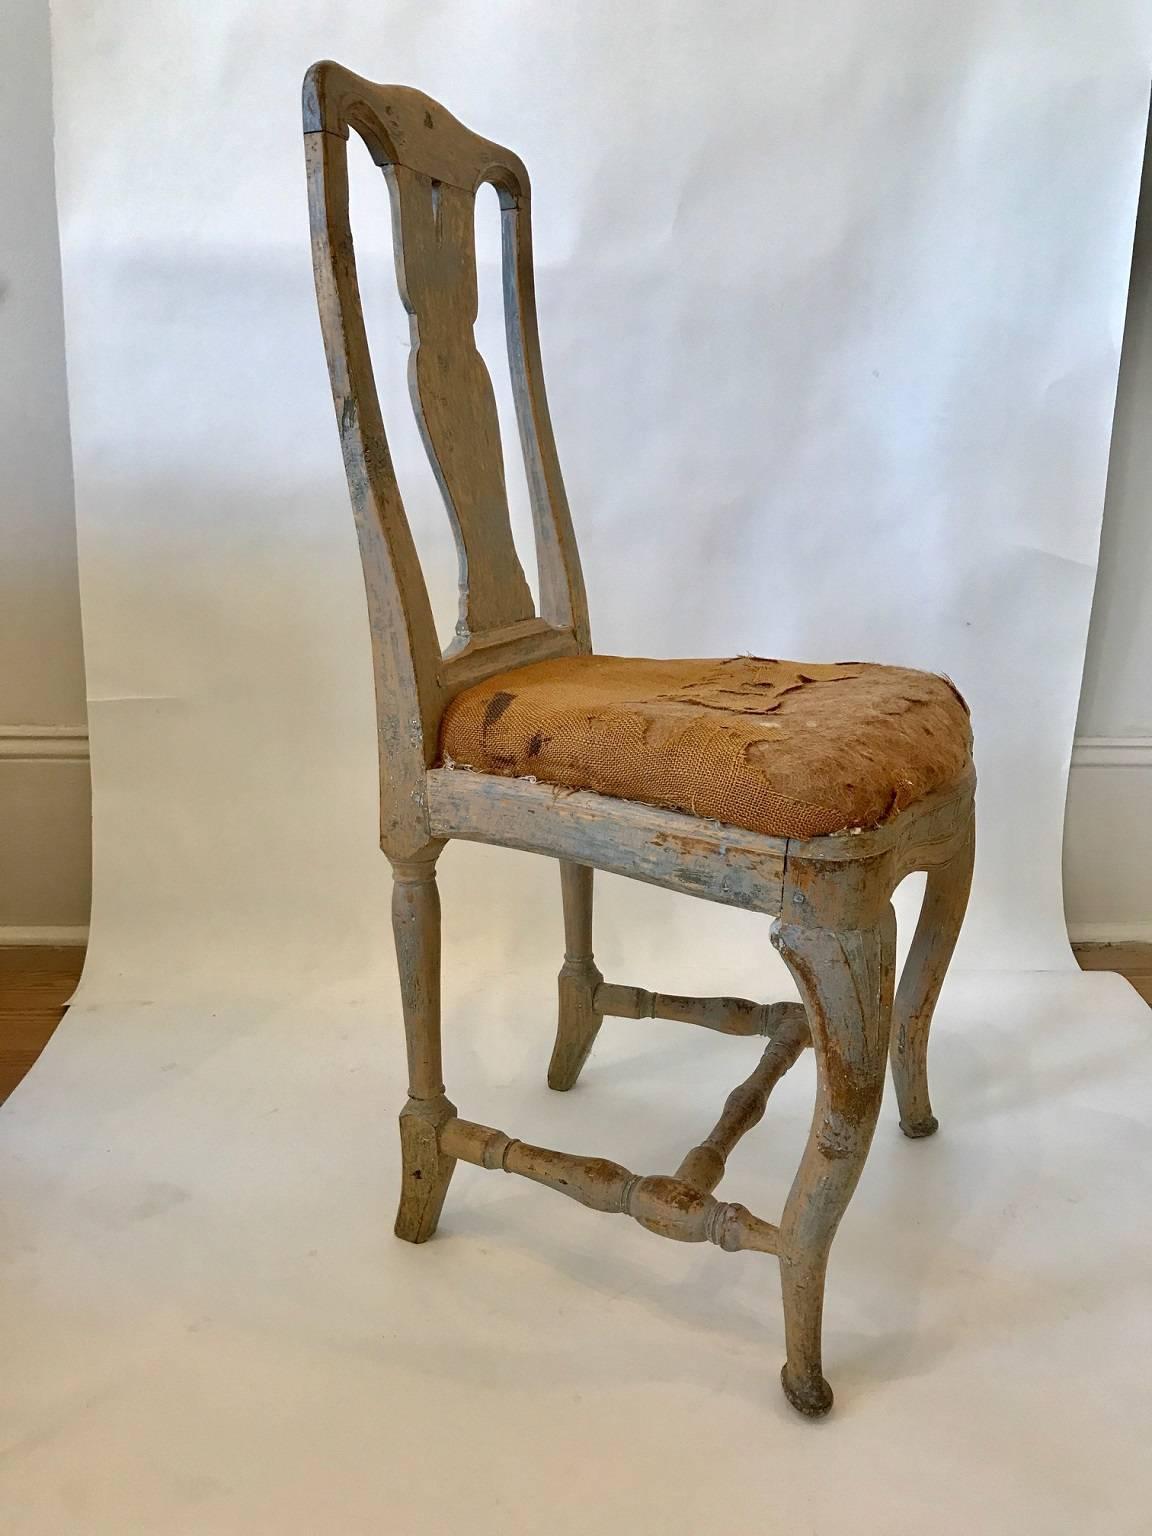 Mid-18th century. Swedish Rococo side chair retaining original paint; attractively carved throughout; gracefully shaped vasiform splat; the cabriole front legs and skirt accented with carving; turned H-shaped stretcher.